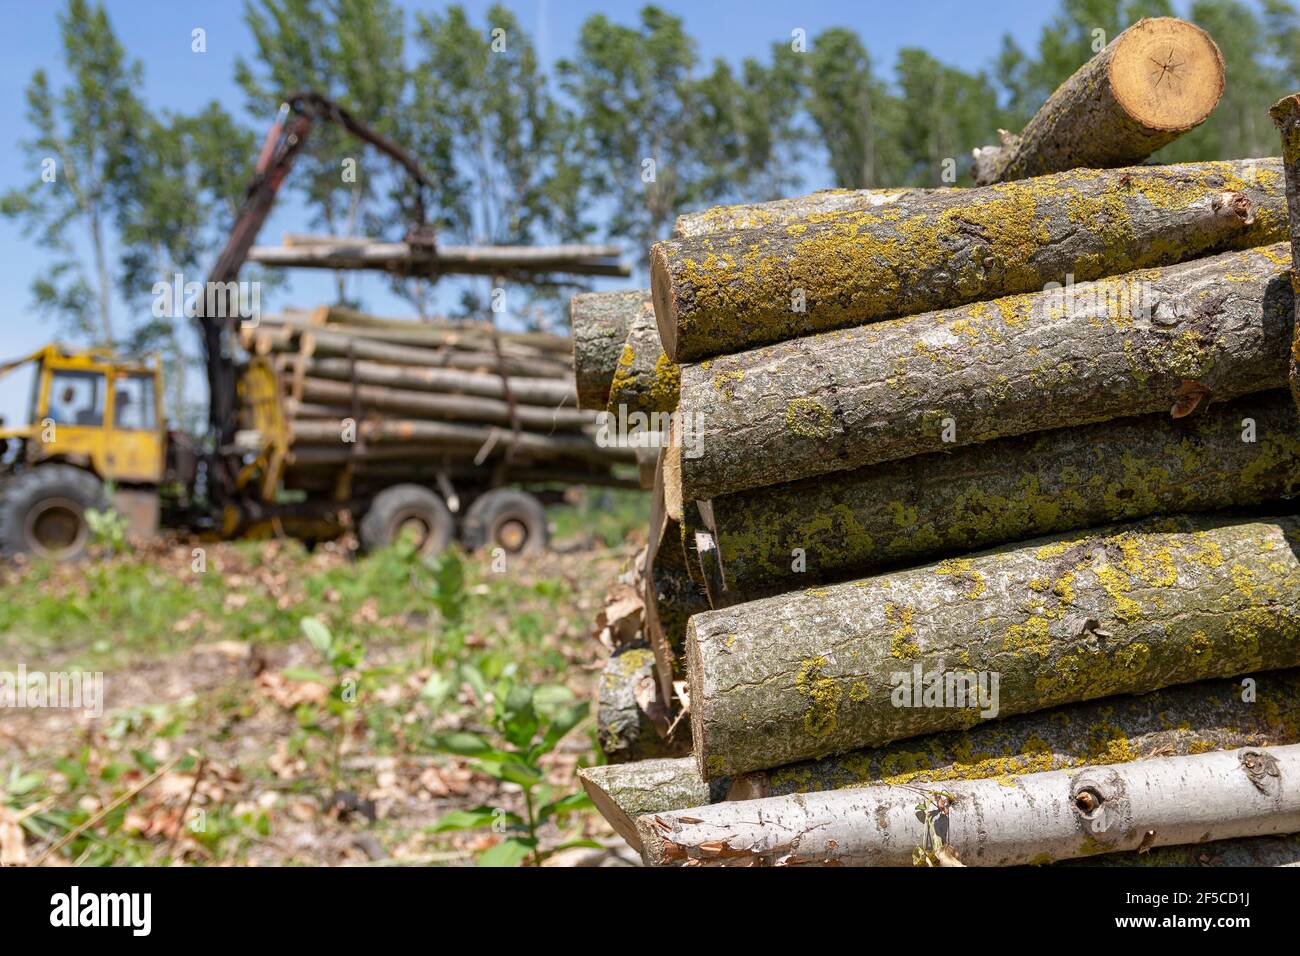 Loading tree logs with timber crane to heavy truck trailer for transportation. Lumber industry and impact on the environment. Stock Photo